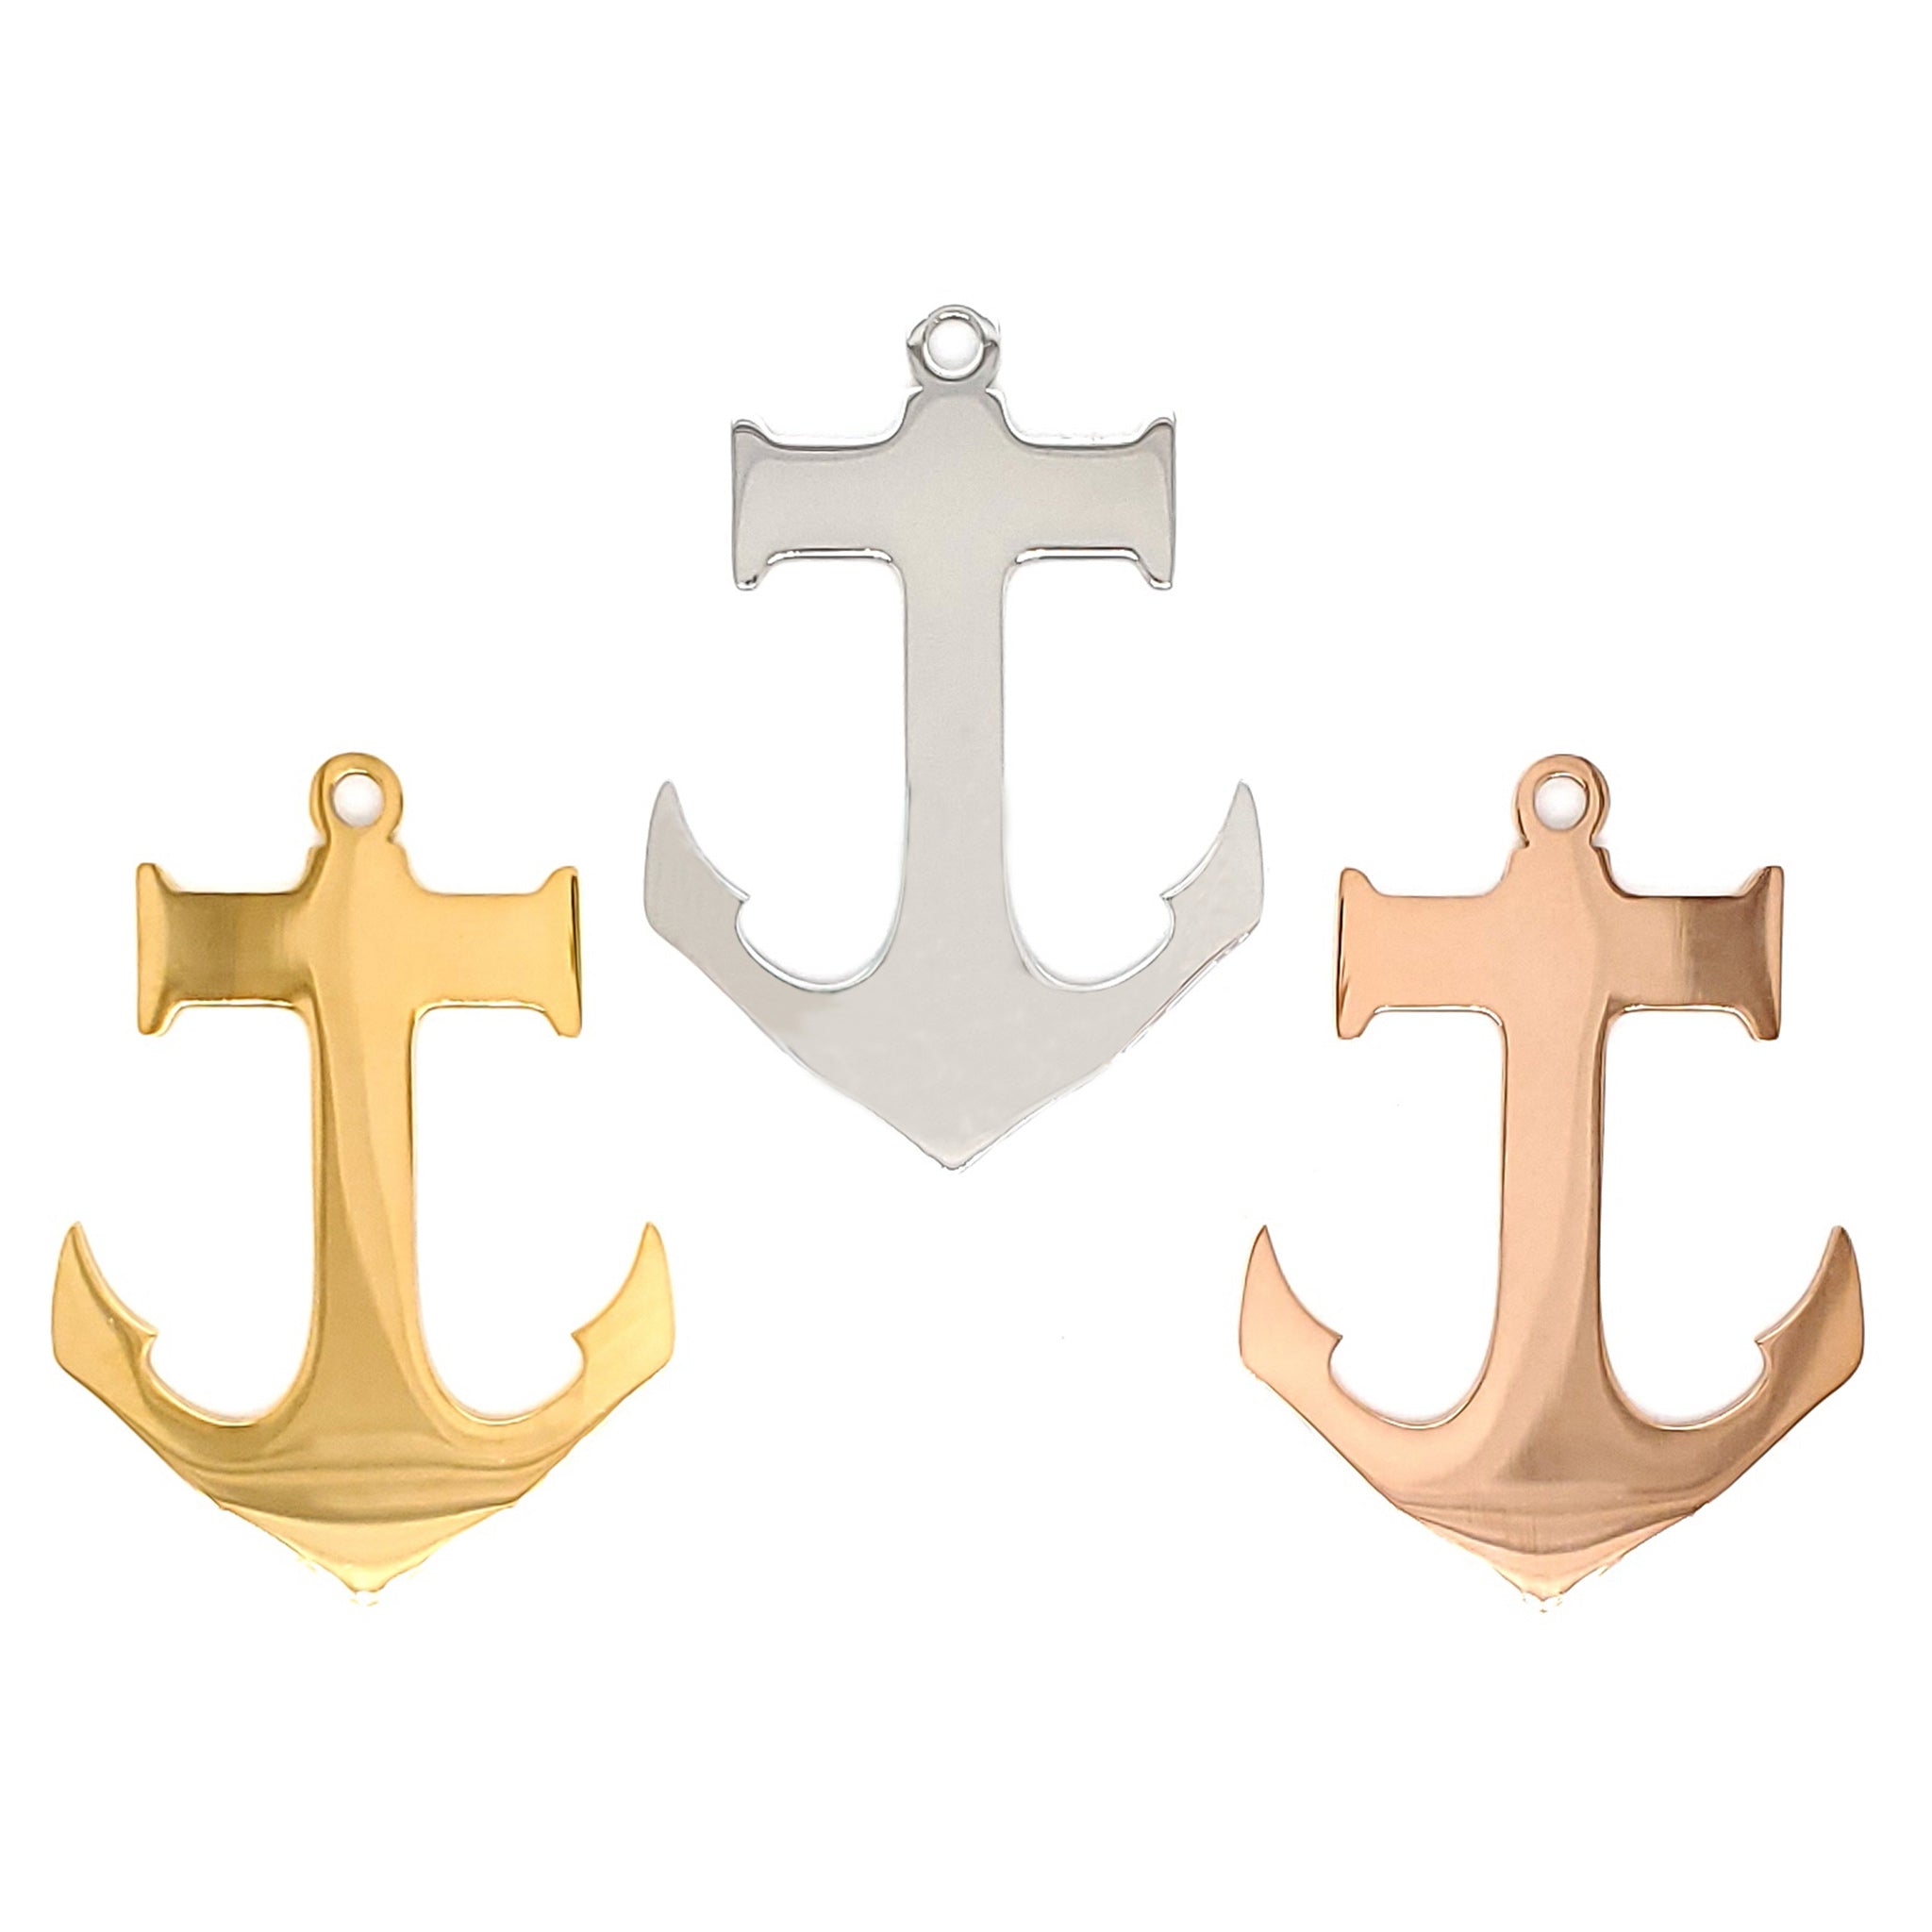 Stainless steel blank anchor pendants in three different colors.